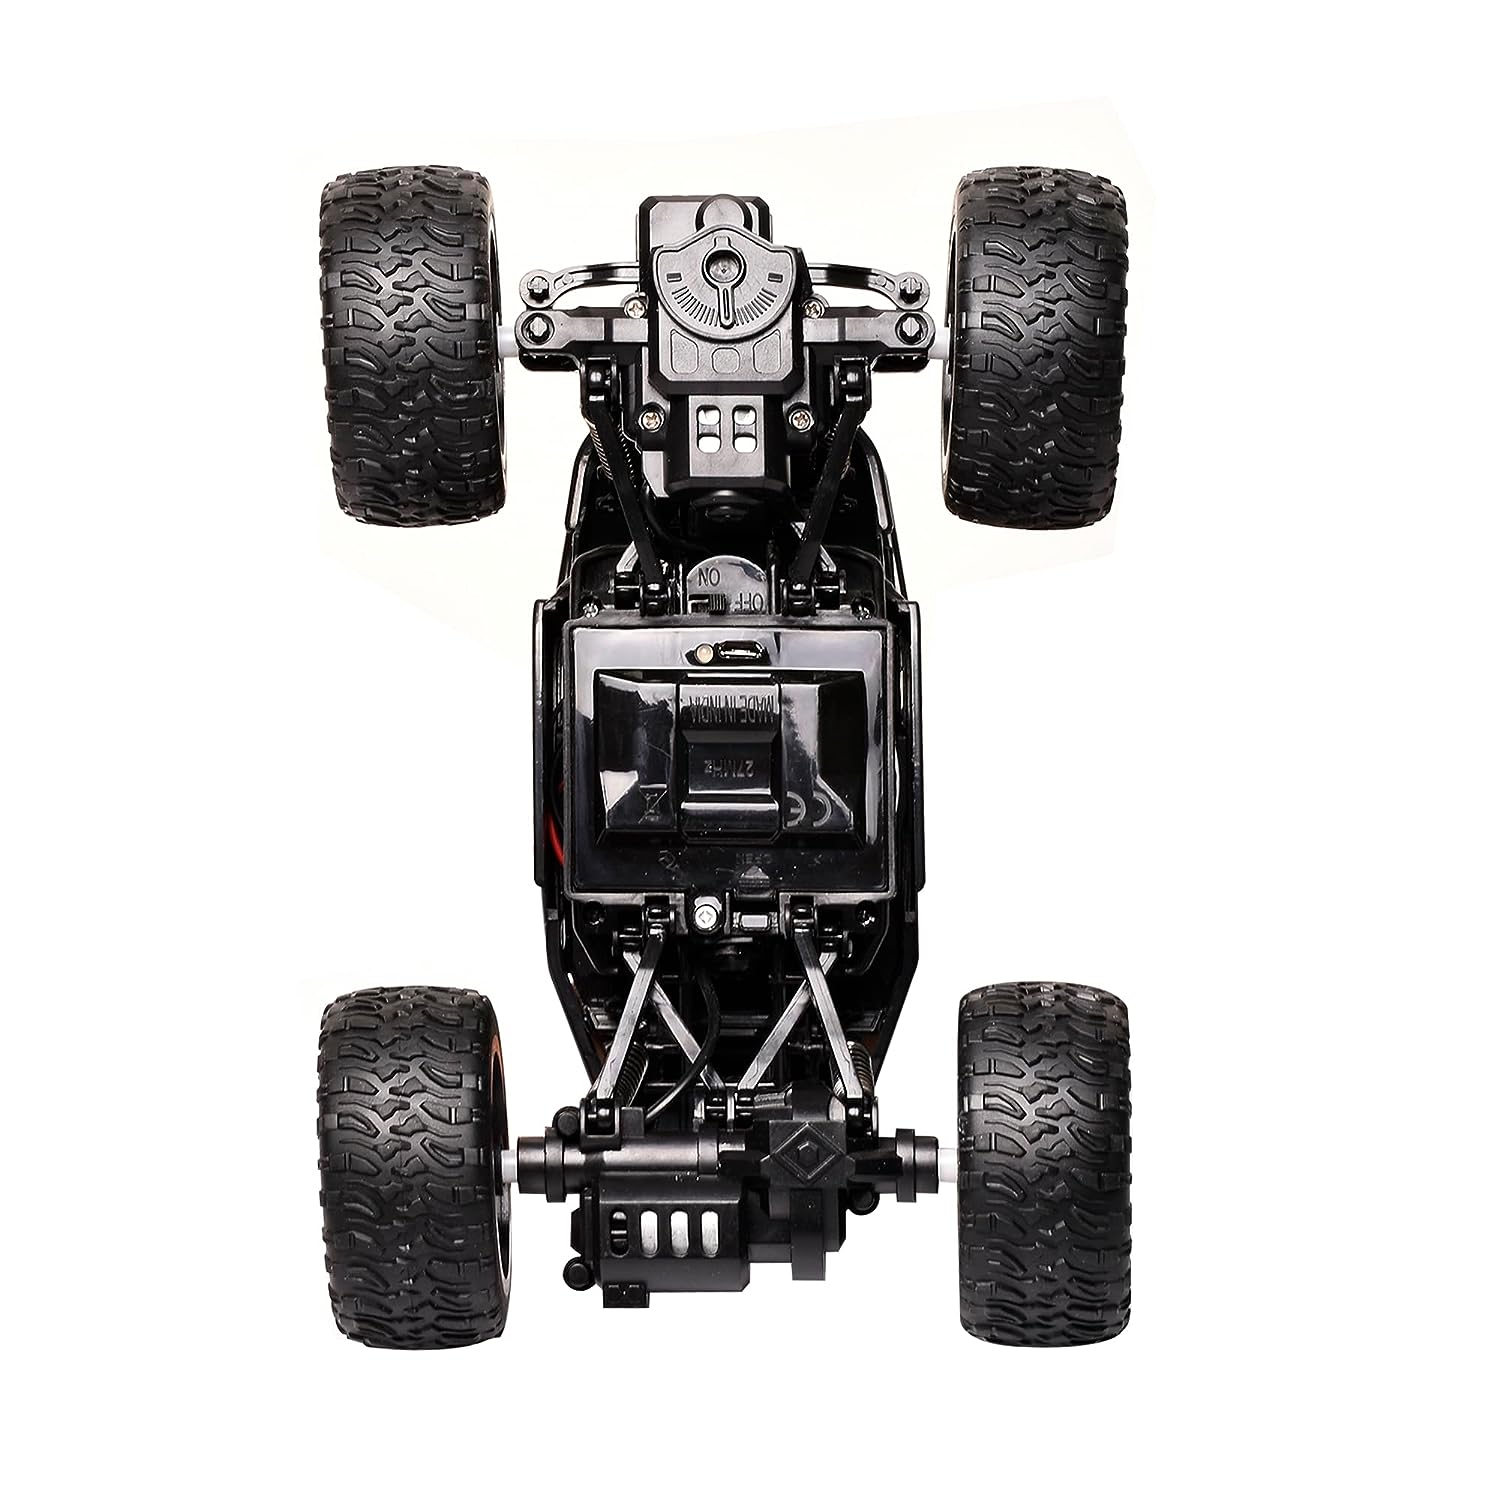 Remote Control Rock Crawler Four Wheel Drive High Speed Car Toys for Kids